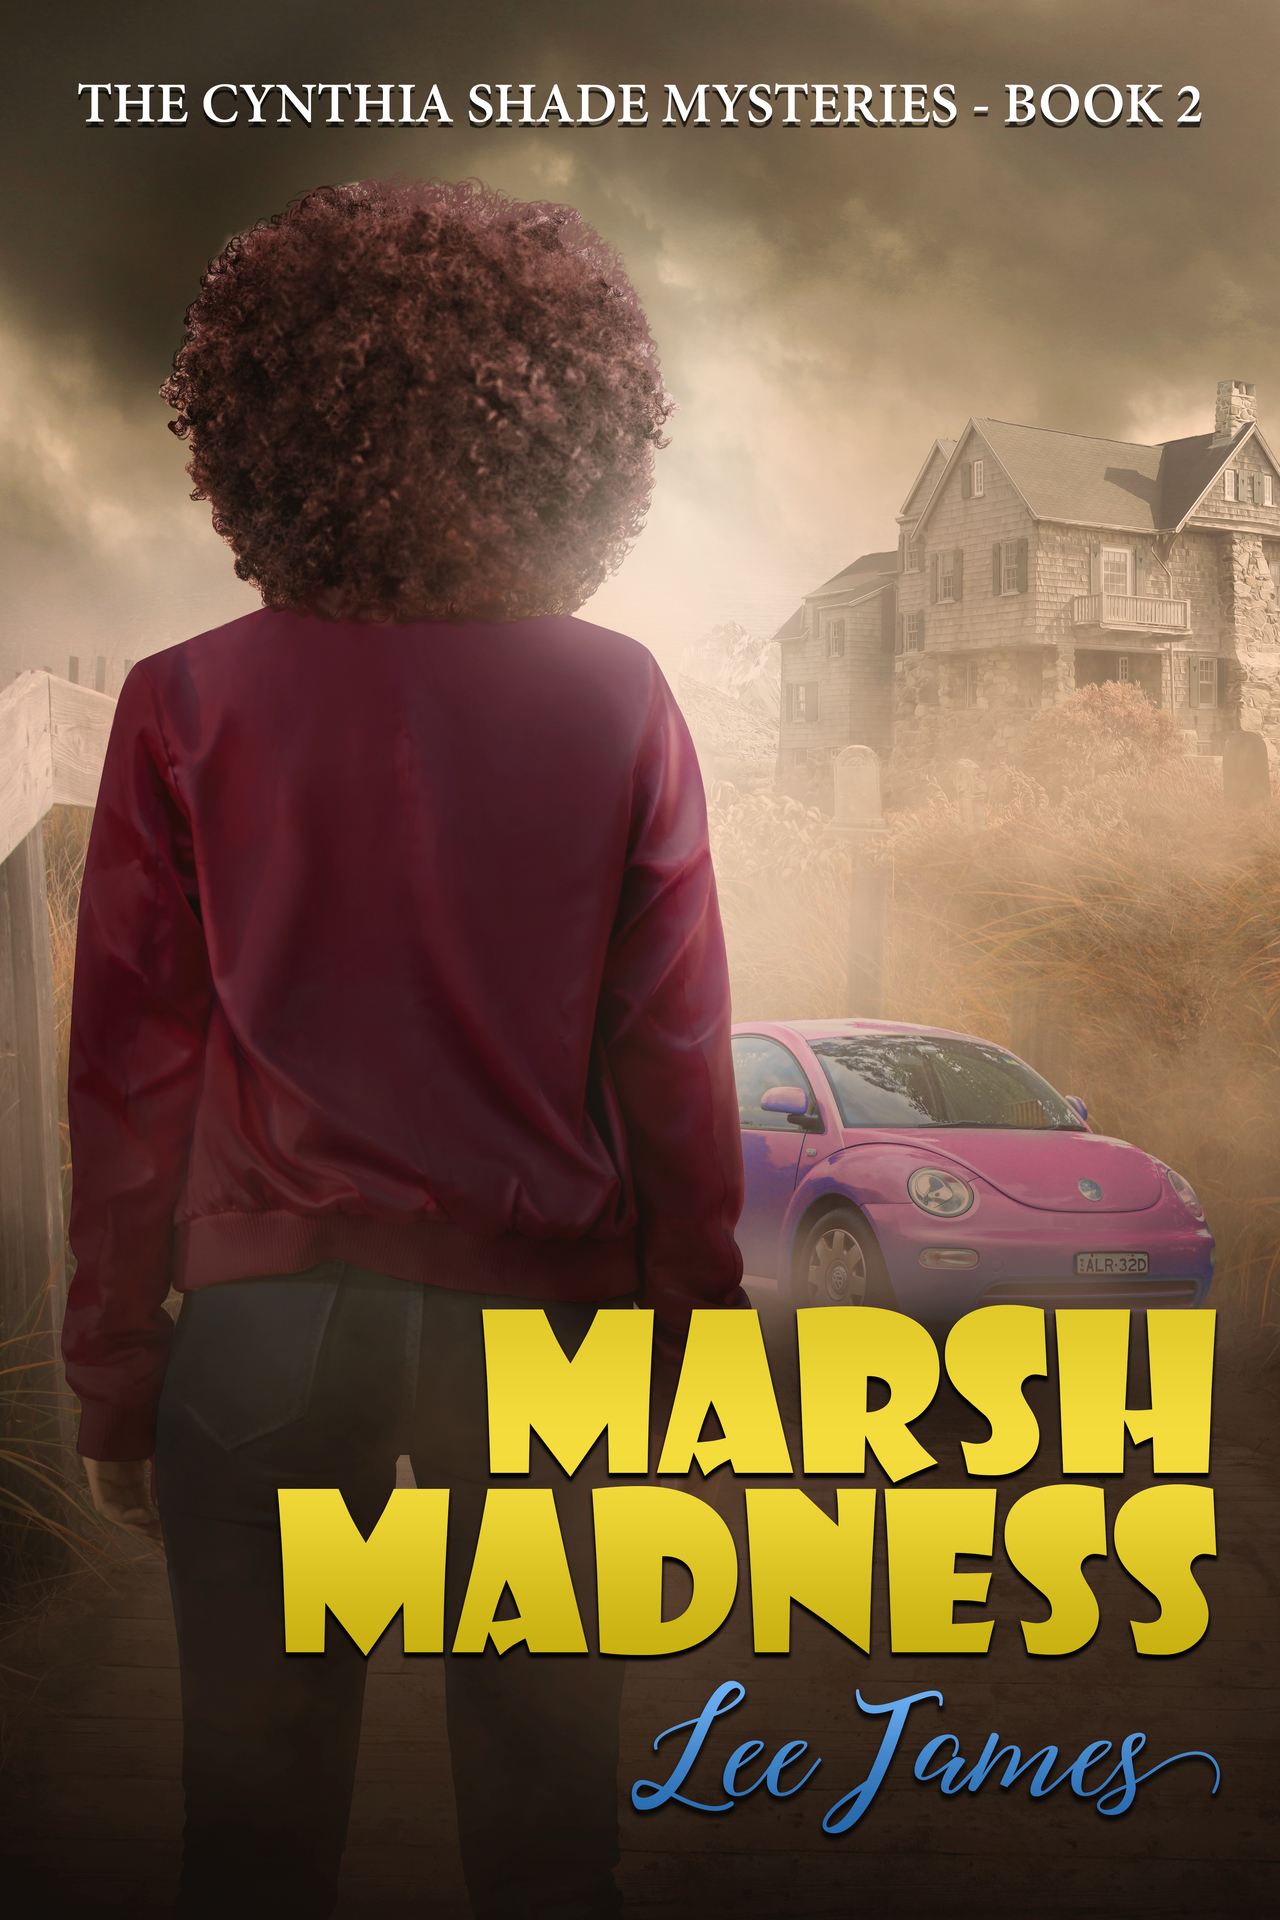 Cynthia Shade still grapples with cynophobia and her mother's disapproval, but she is slowly settling into a new routine. Then her sister is arrested for murder, Sheriff Joseph gets shot, and her beloved Beetle catches on fire. To top it off, someone is d